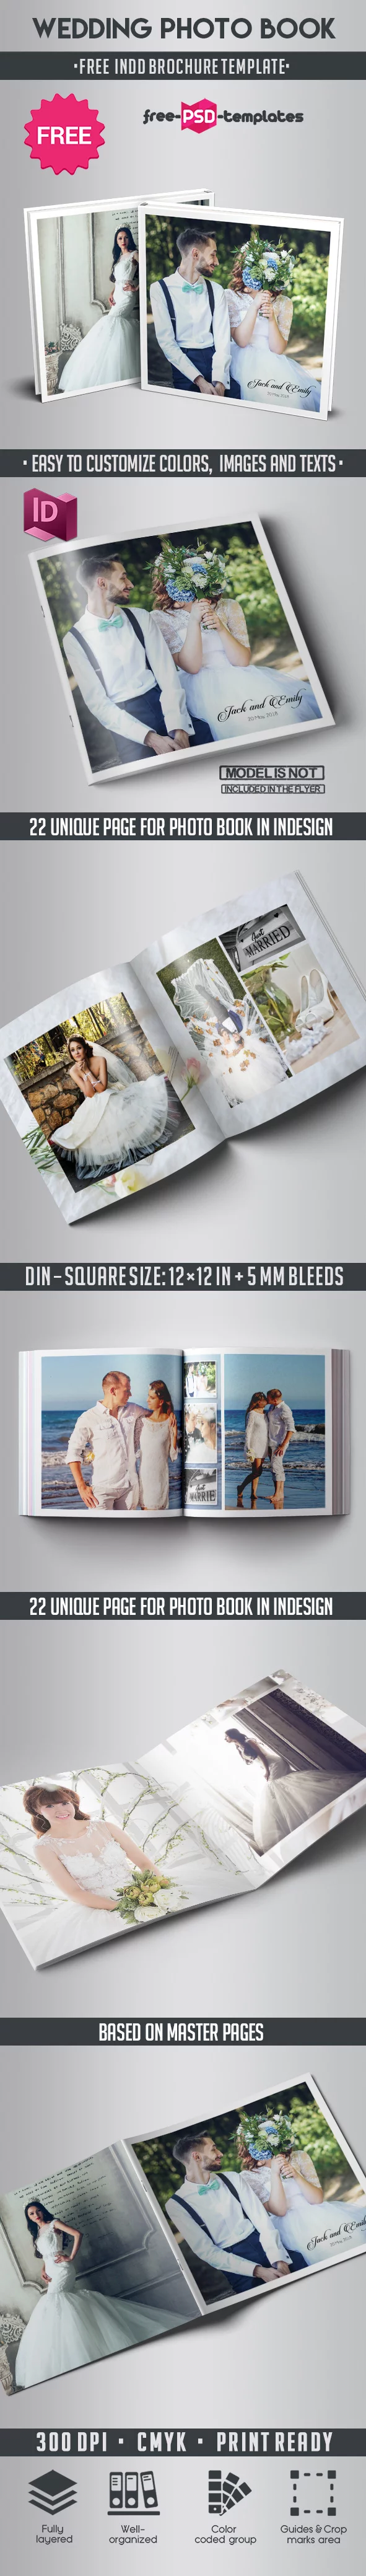 Free Wedding Photo Book Indd Template